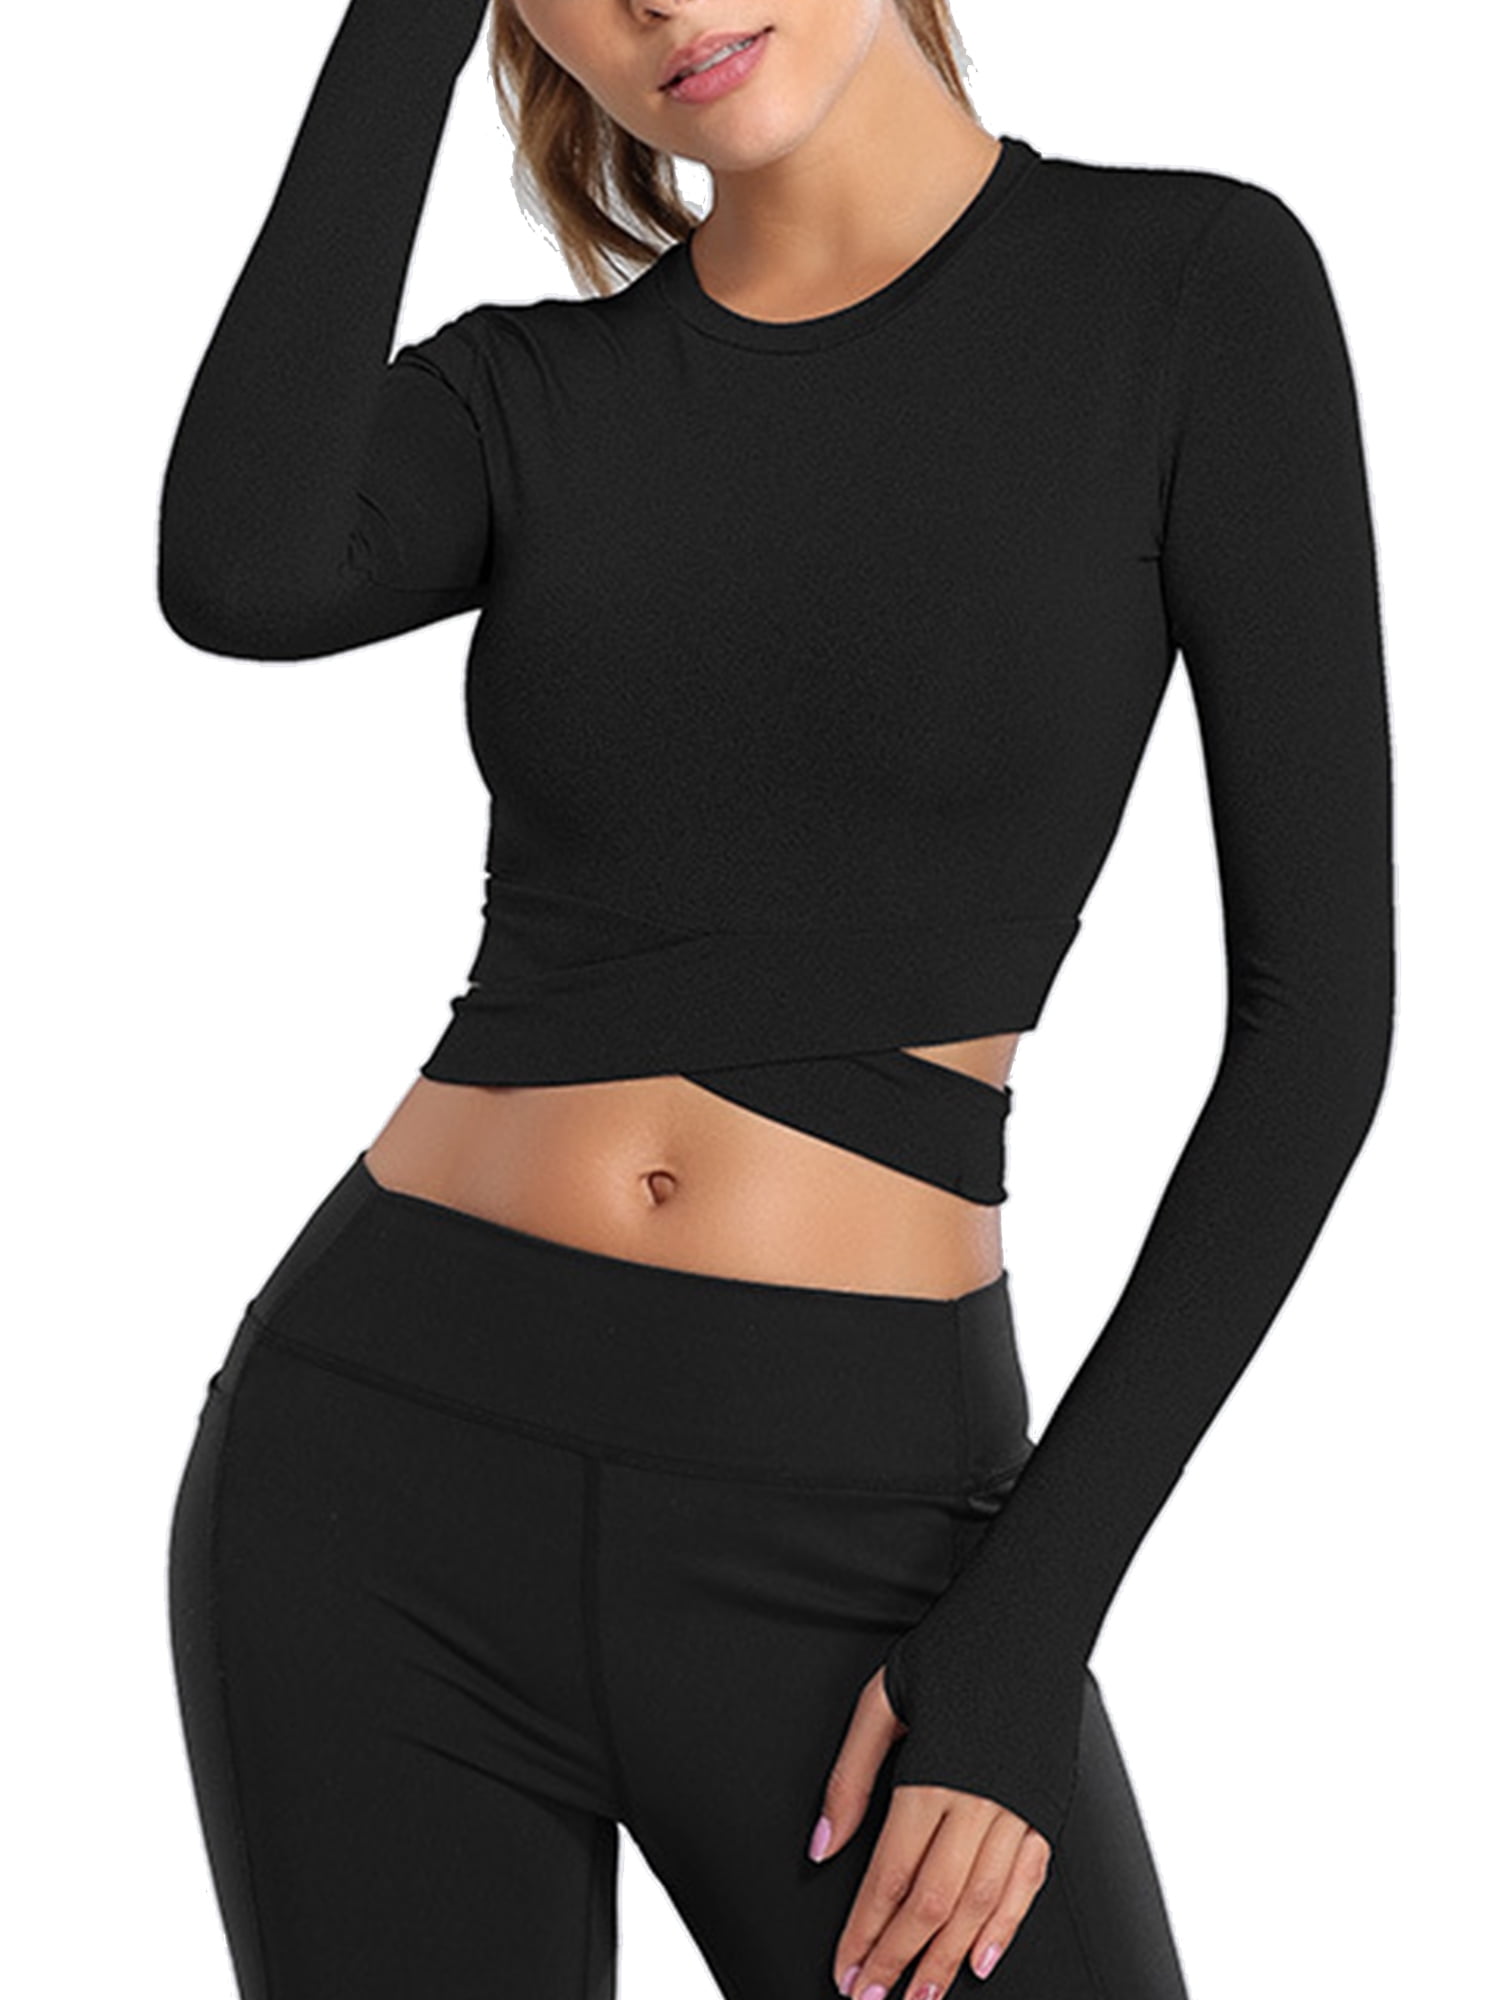 Capreze Workout Yoga Tops for Women Crop Top Compression Long Sleeve Fitness  Athletic Yoga Sports Shirt 